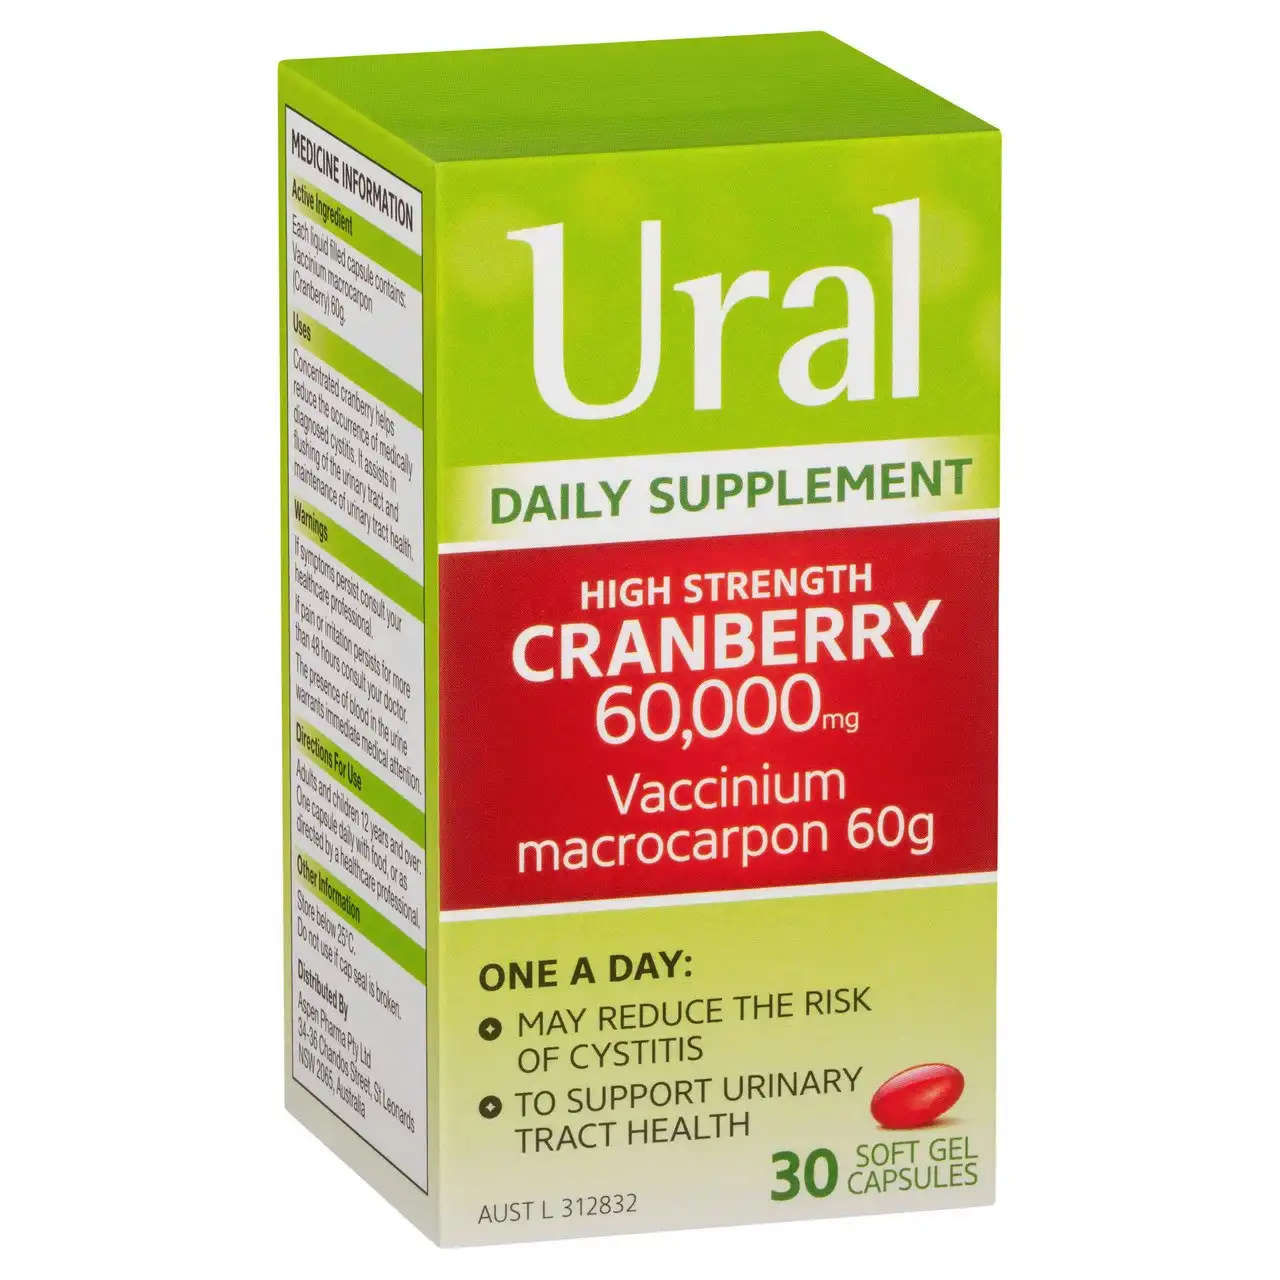 Ural Cranberry Daily Capsules x 30